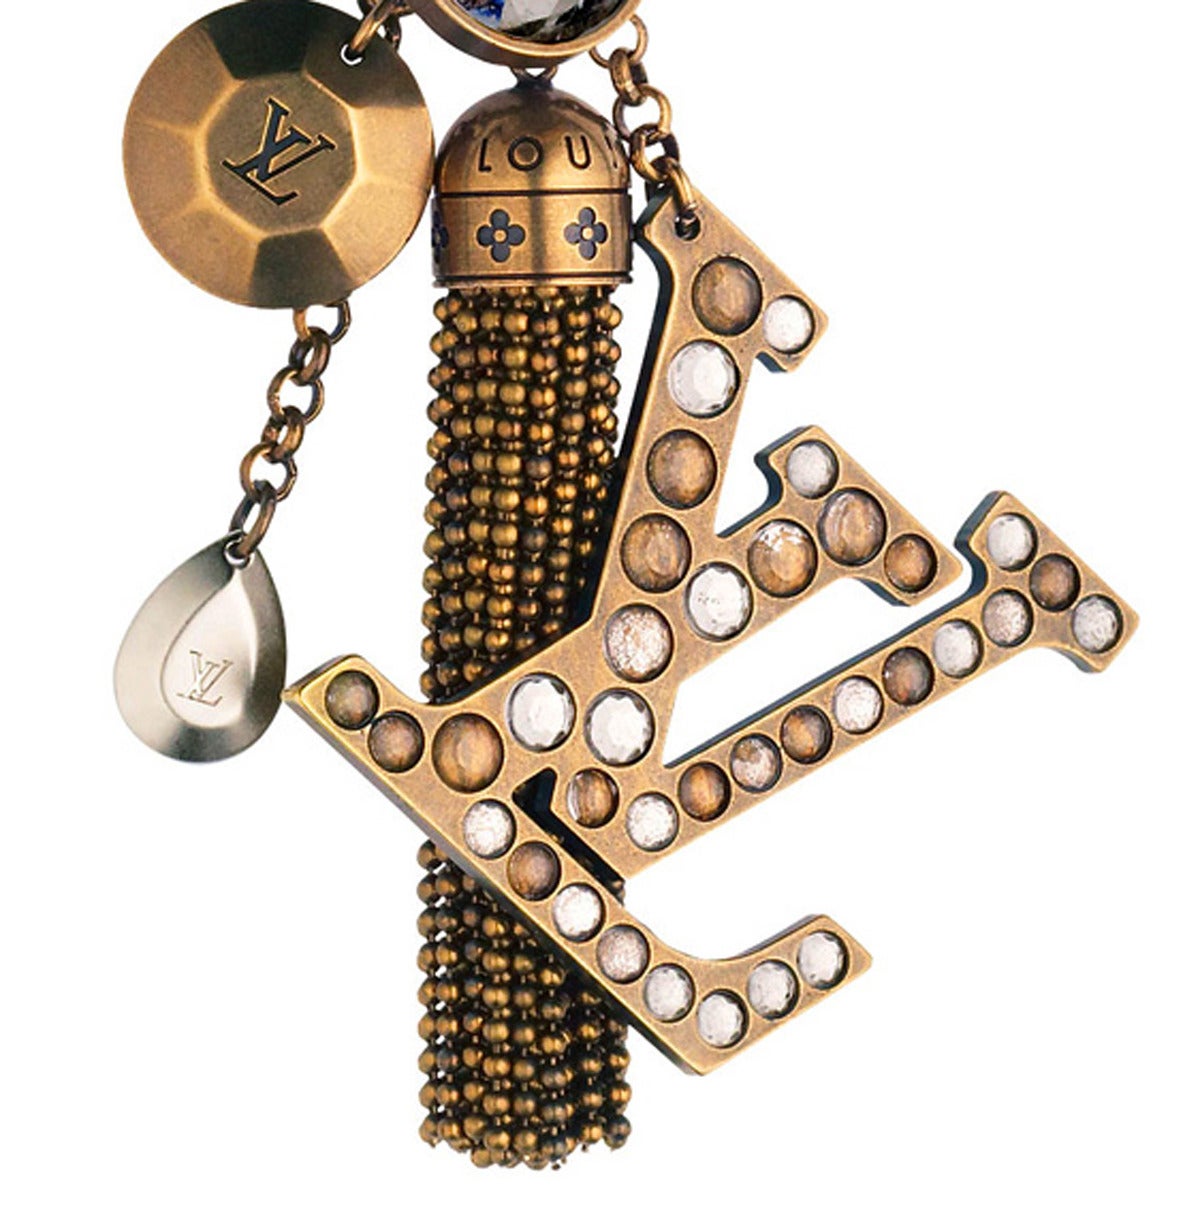 Beautiful Louis Vuitton  bag charm/key ring that coincides with this season’s obvious trend, the tassle. Caprice Key Ring is an eye catching bag charm as it features an antique gold-finish brass tassle, strassed LV logo and Crystallized™ Swarovski